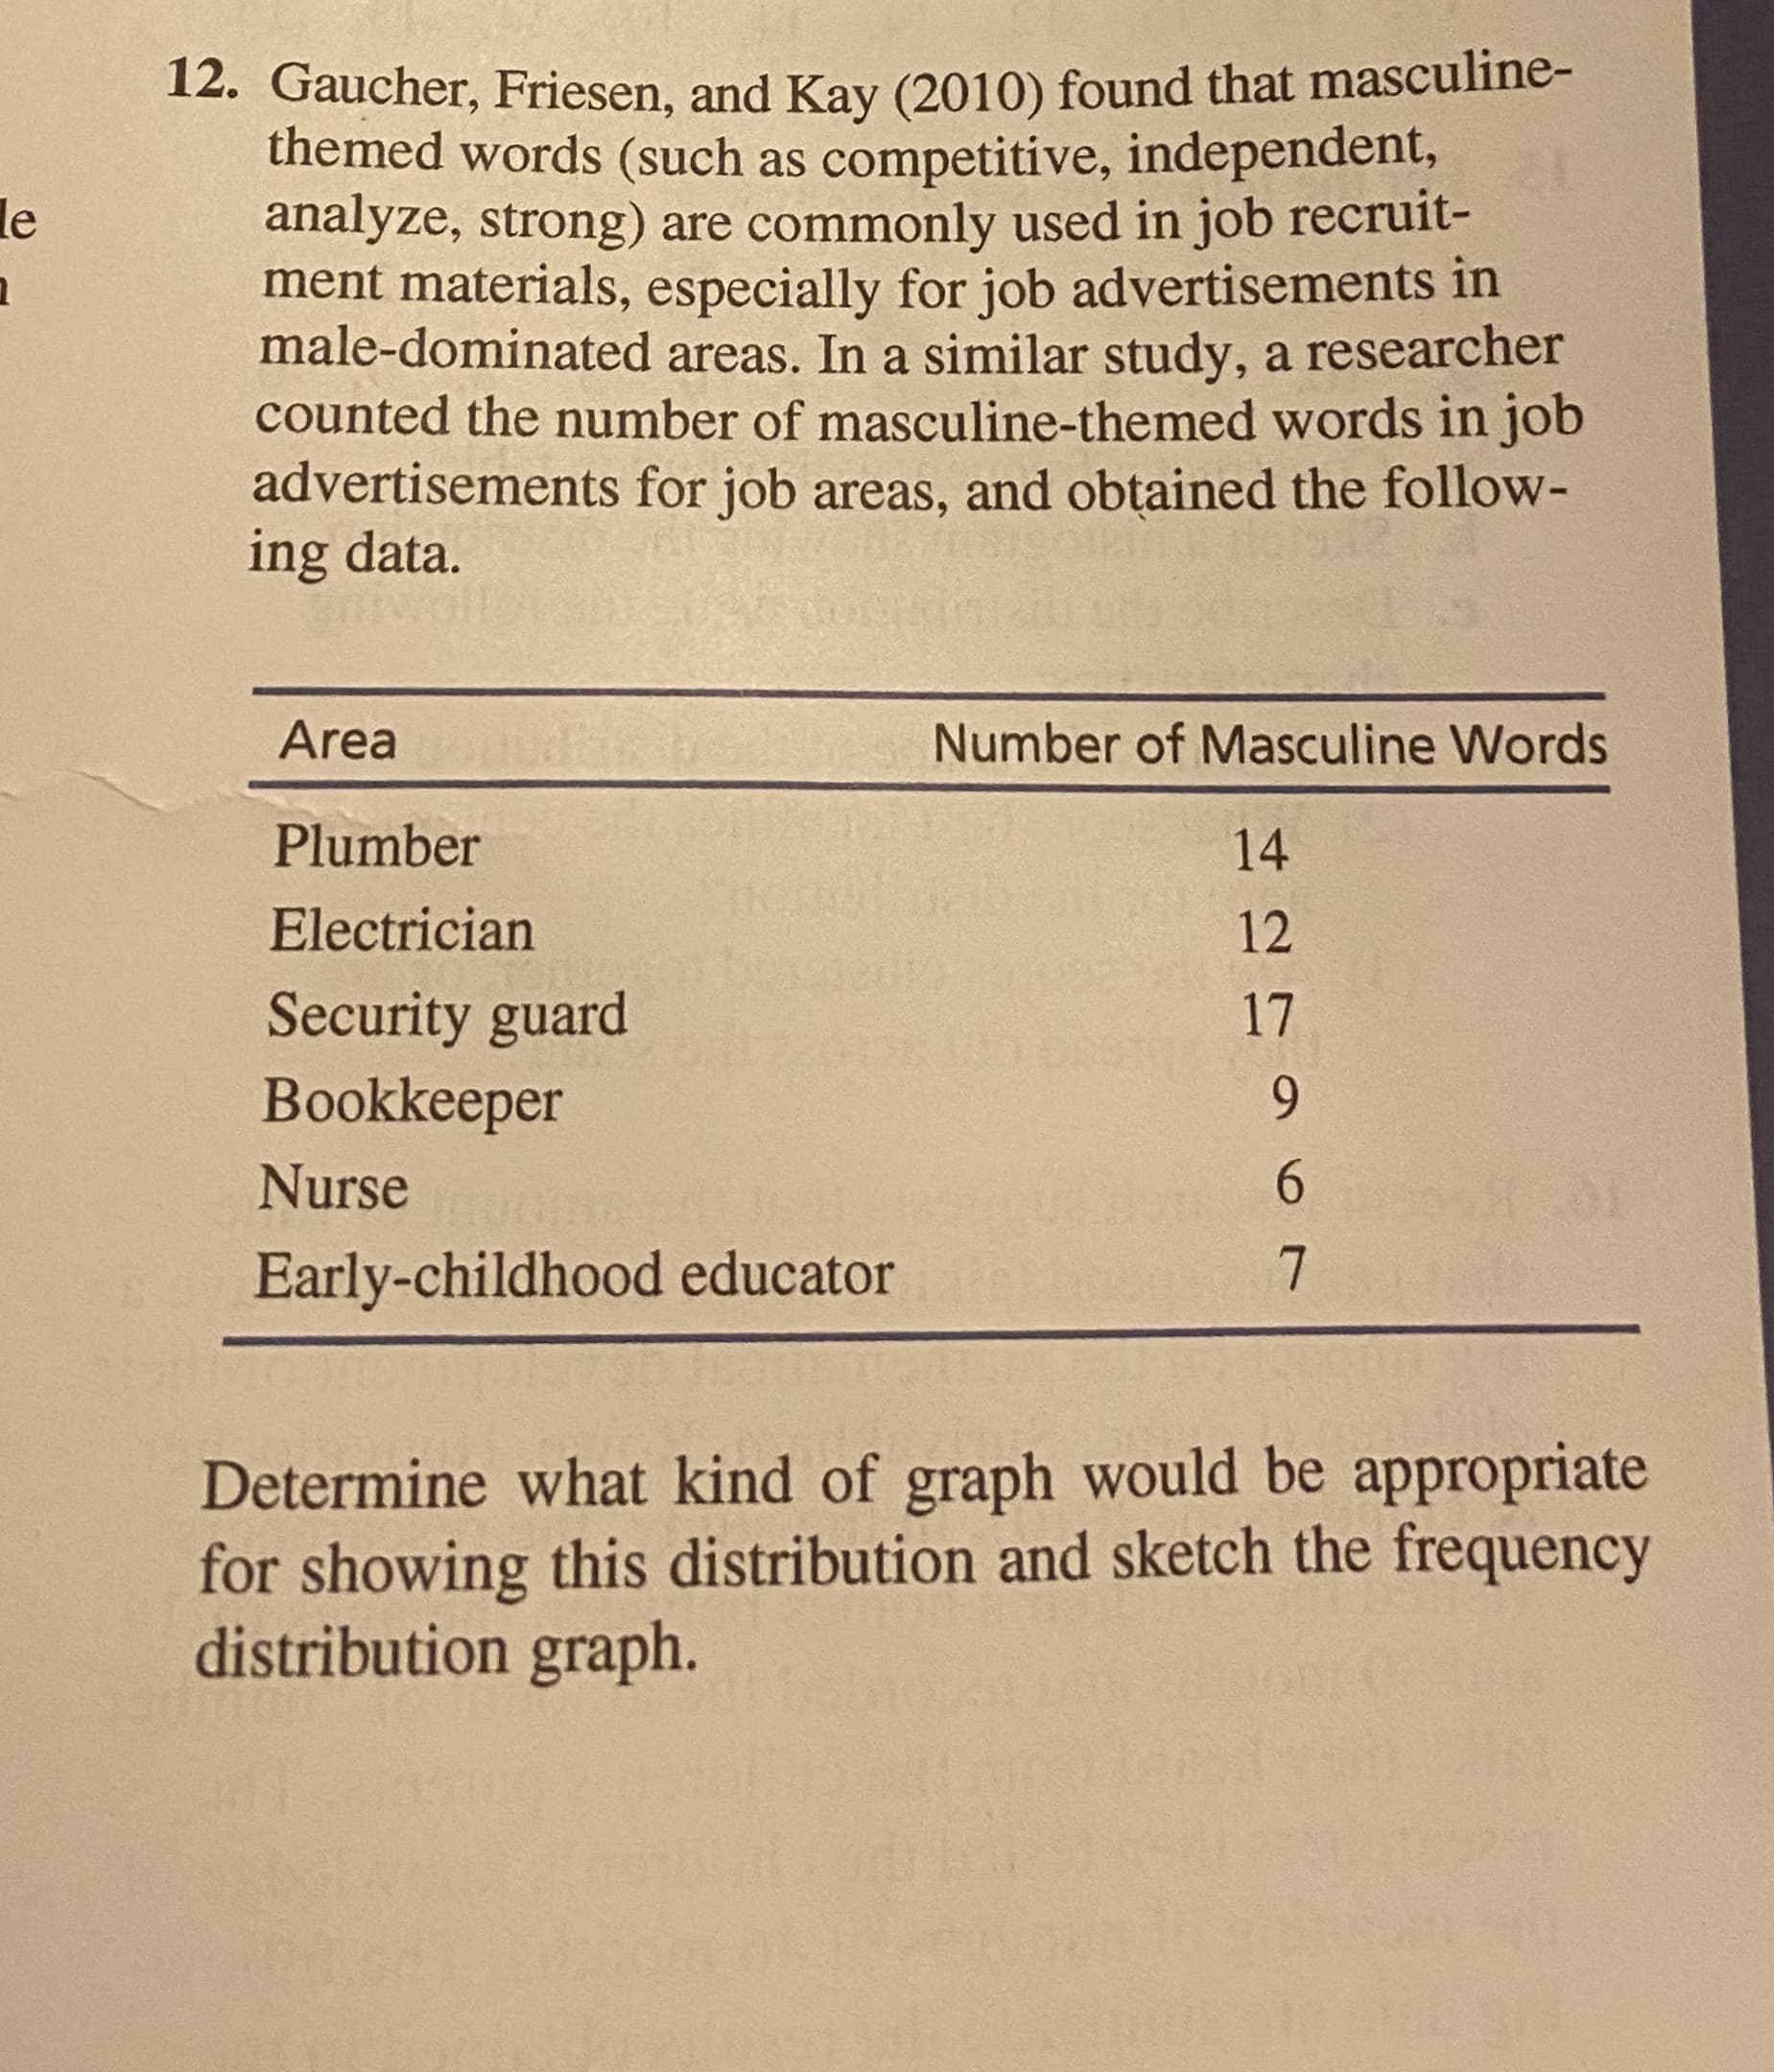 12. Gaucher, Friesen, and Kay (2010) found that masculine-
themed words (such as competitive, independent,
analyze, strong) are commonly used in job recruit-
ment materials, especially for job advertisements in
male-dominated areas. In a similar study, a researcher
counted the number of masculine-themed words in job
advertisements for job areas, and obtained the follow-
ing data.
